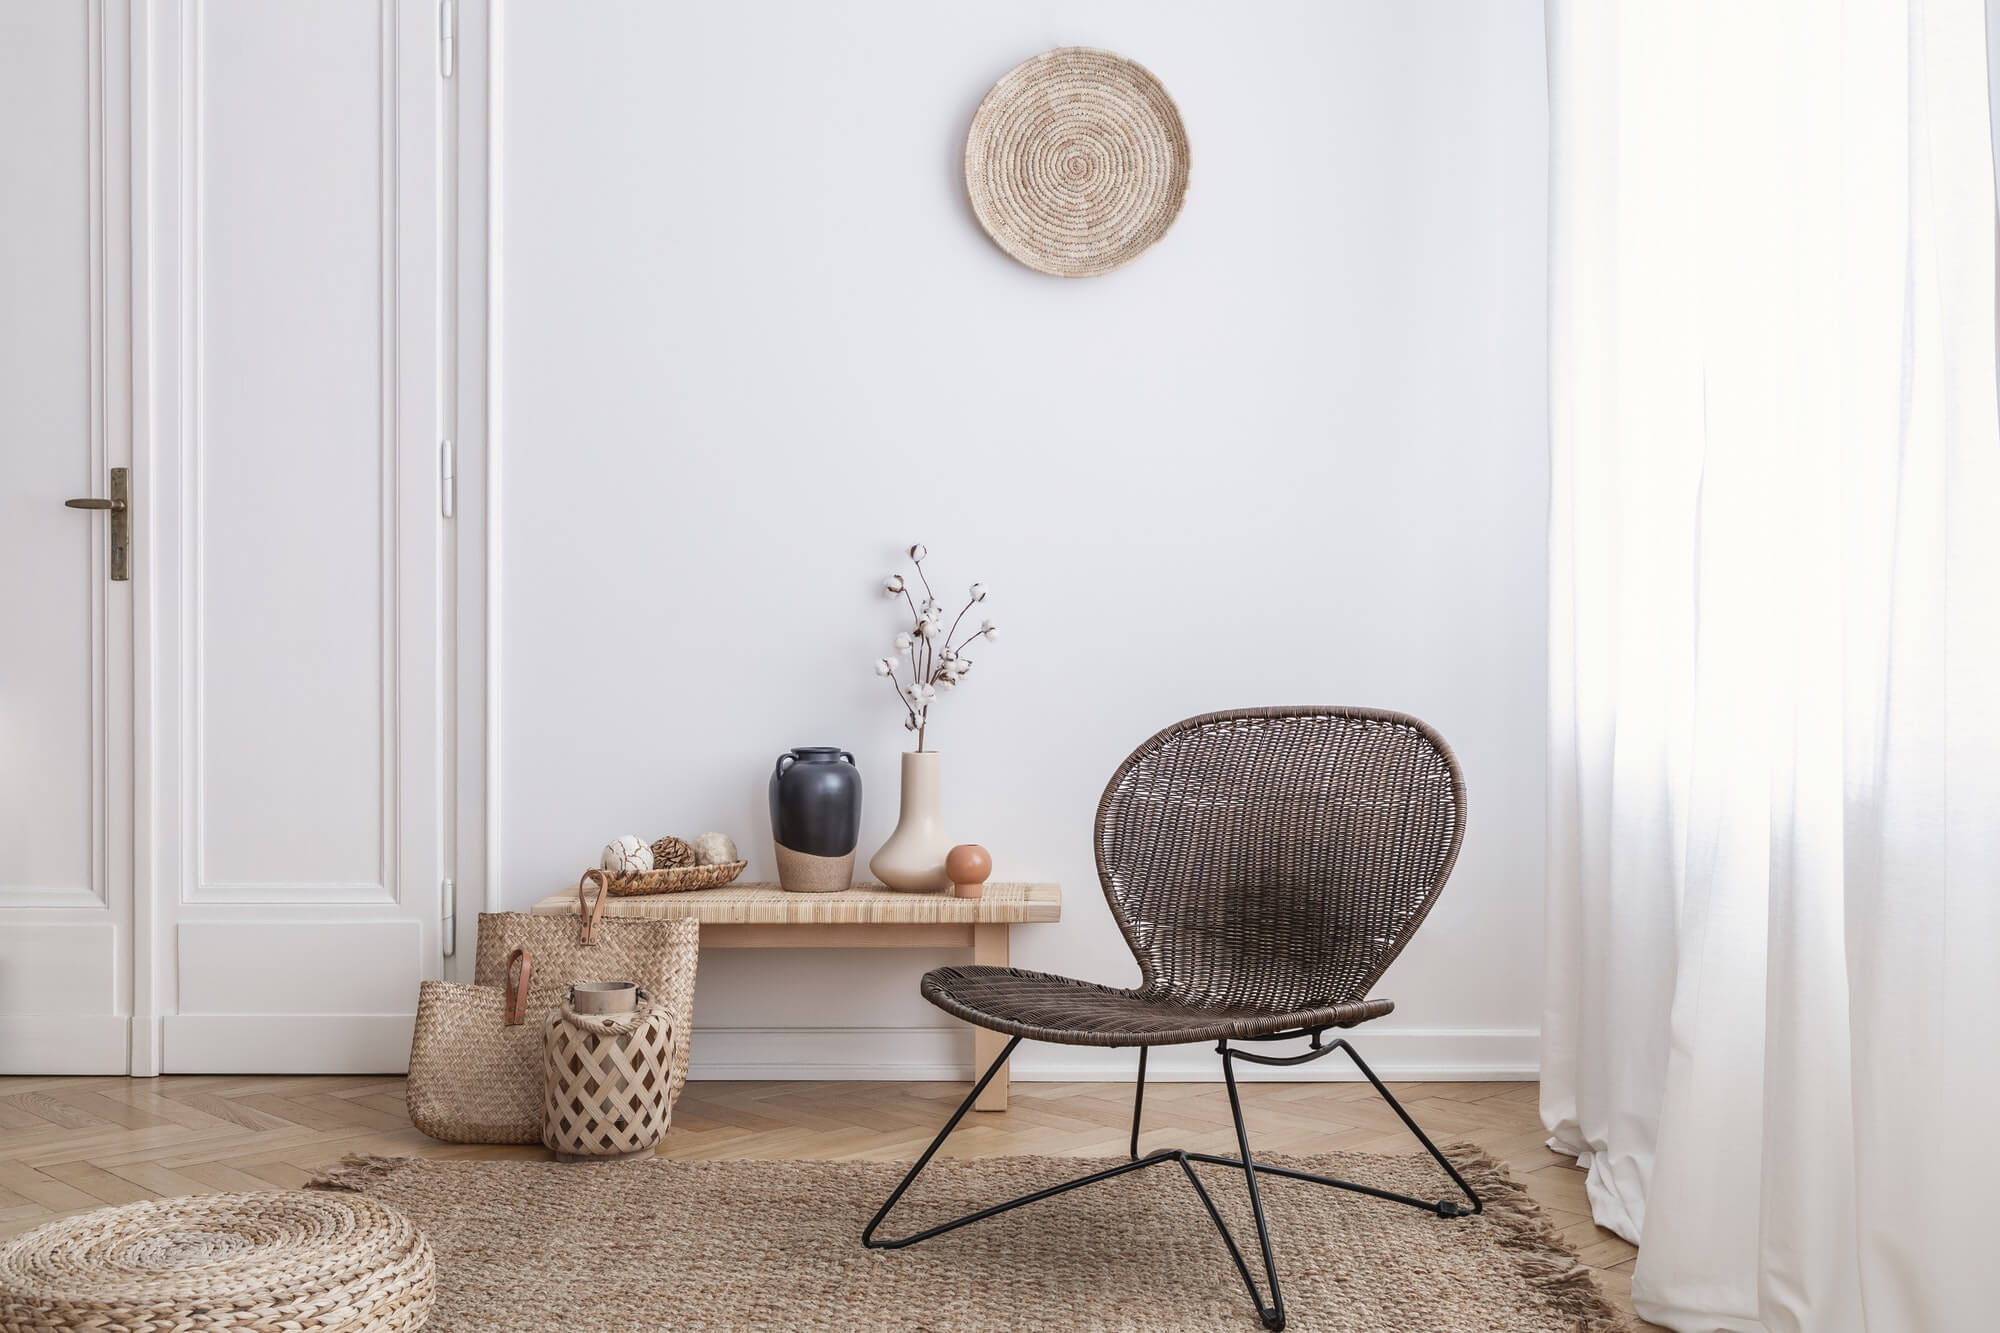 modern armchair and pouf on brown carpet in white apartment inte.jpg